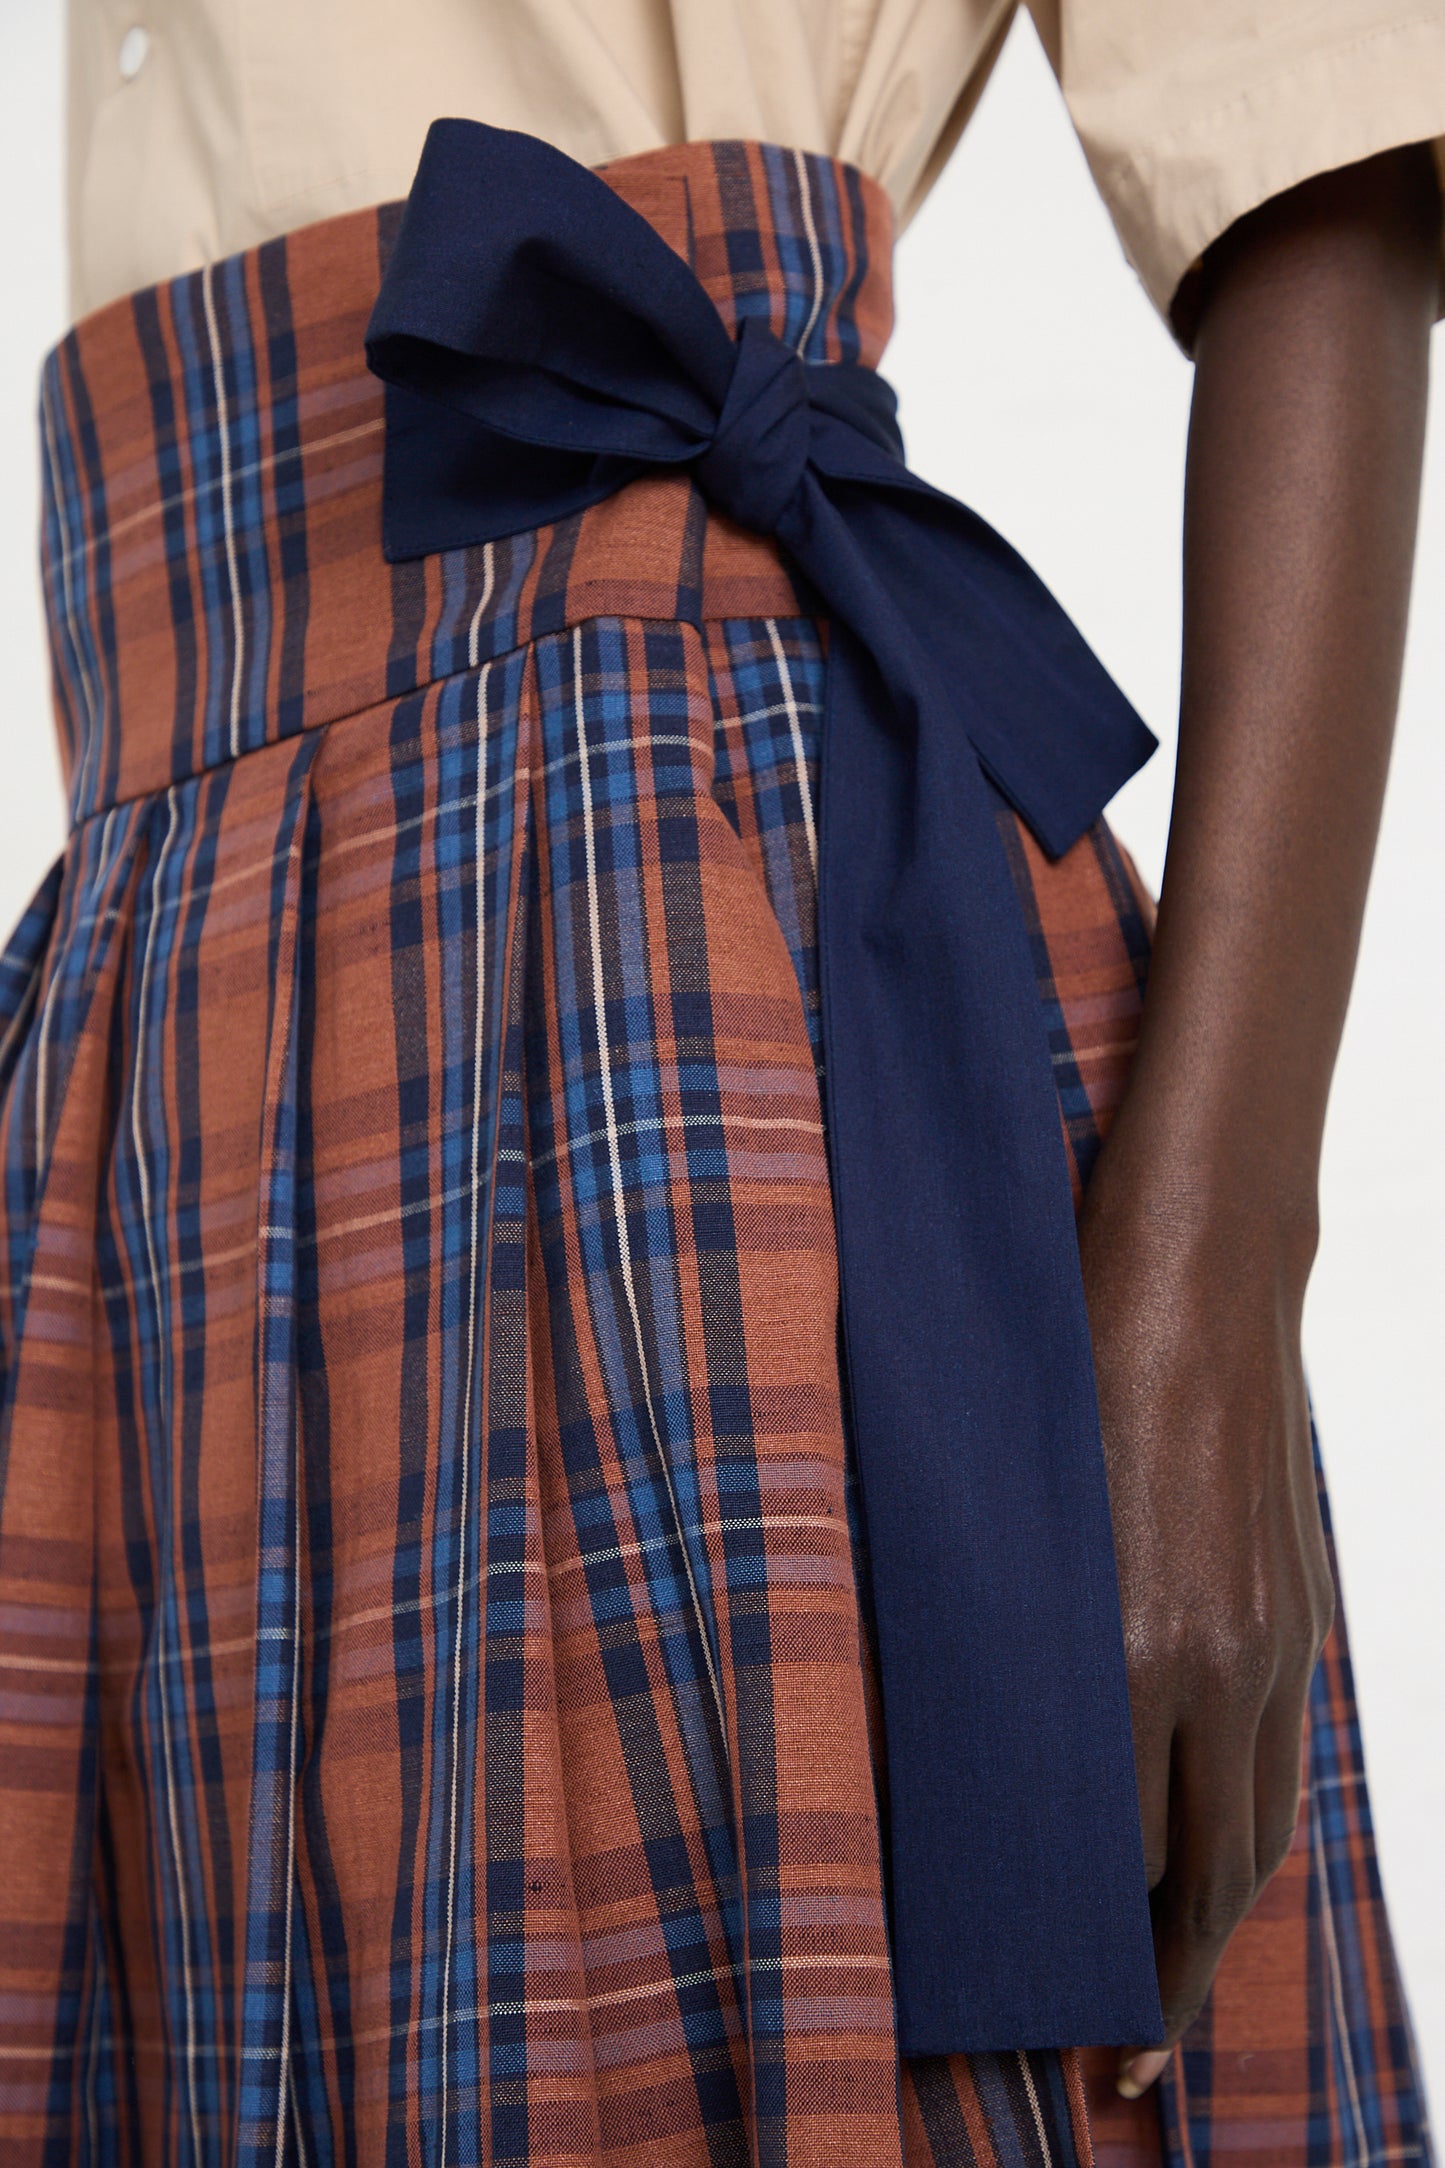 Close-up of a person wearing the Toujours Cotton Linen Madras Plaid Cloth Pleated Wrap Maxi Skirt in Brick, featuring shades of brown and blue, pleats, and a wide waistband tied in a large dark blue bow. The person is wearing a beige top.